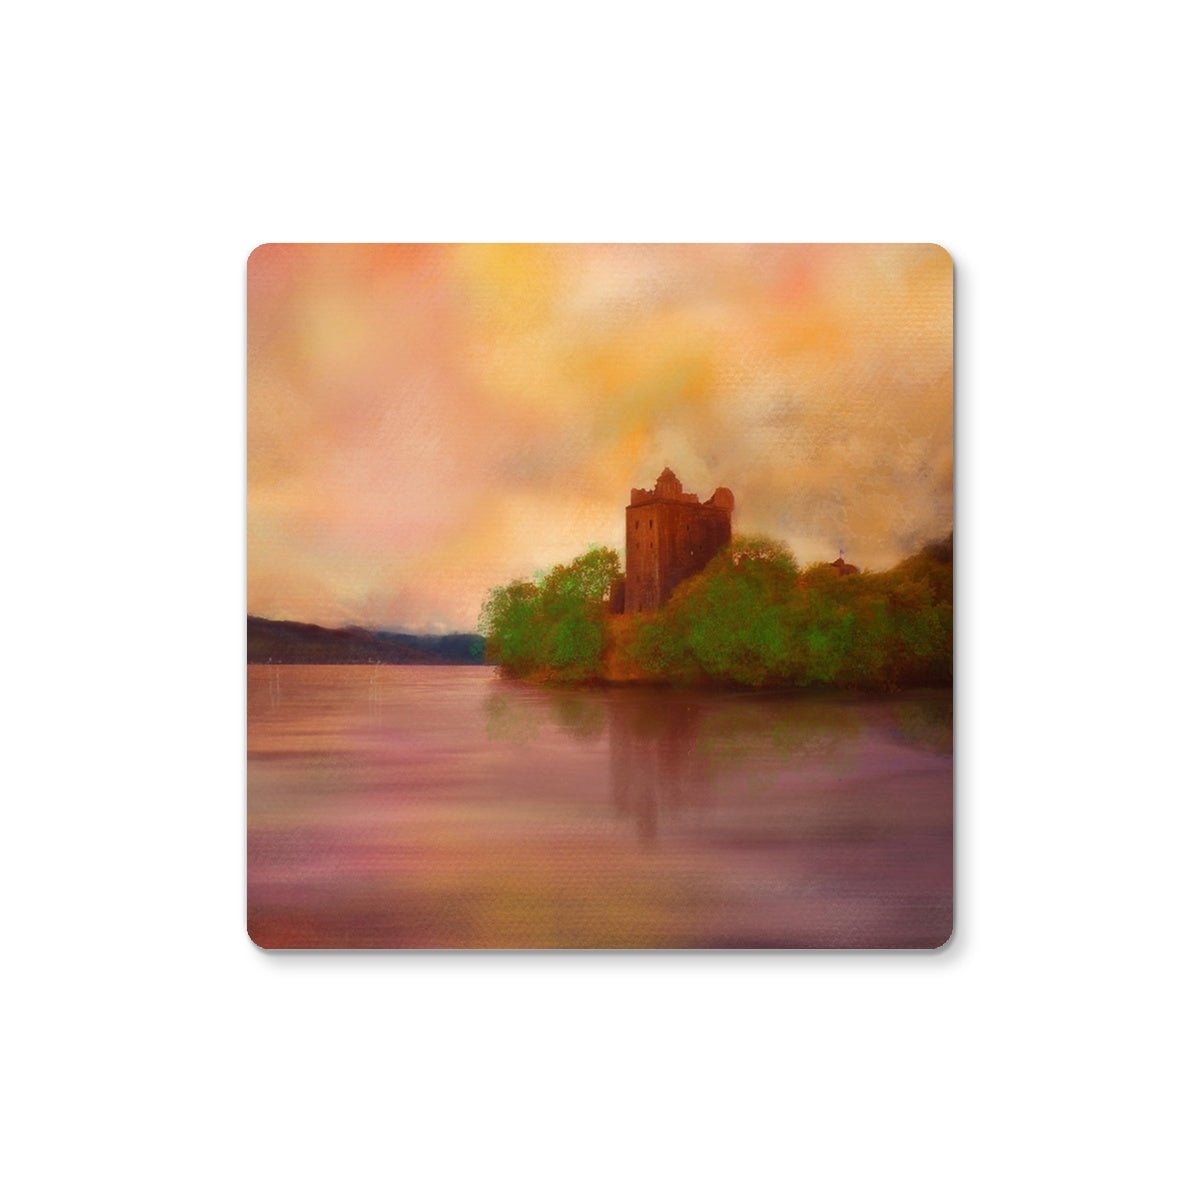 Urquhart Castle Art Gifts Coaster-Coasters-Historic & Iconic Scotland Art Gallery-2 Coasters-Paintings, Prints, Homeware, Art Gifts From Scotland By Scottish Artist Kevin Hunter